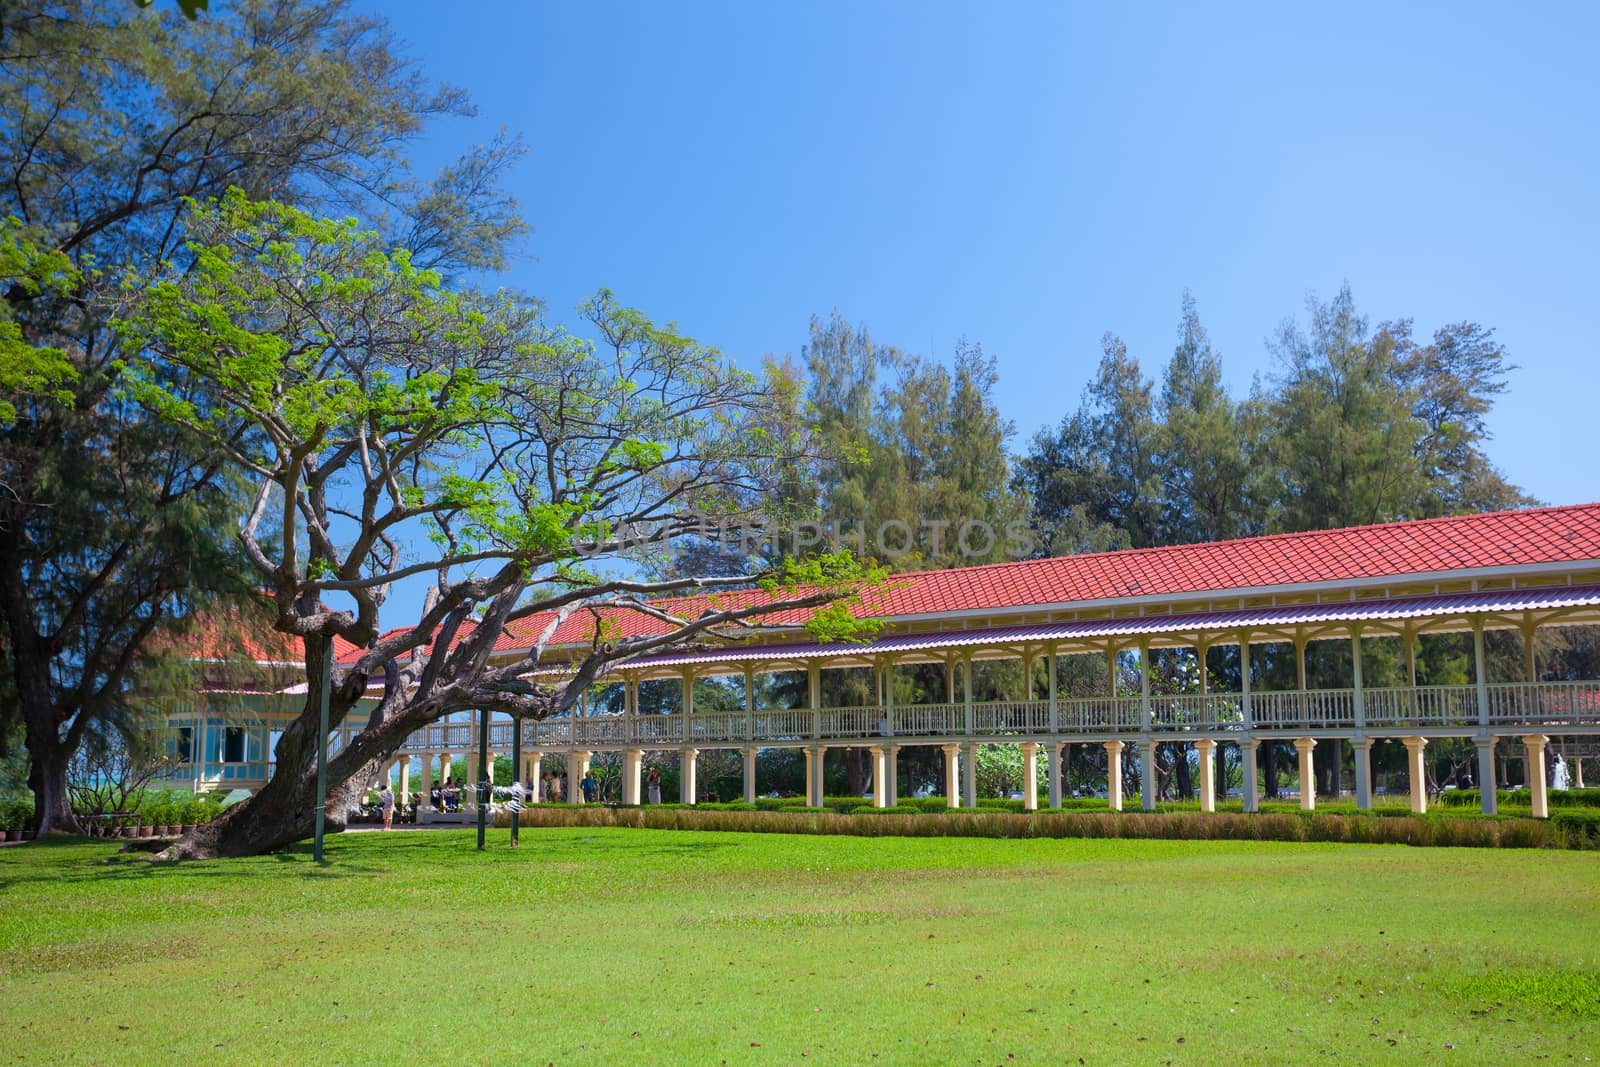 Pavilion and corridor on green grass with blue sky